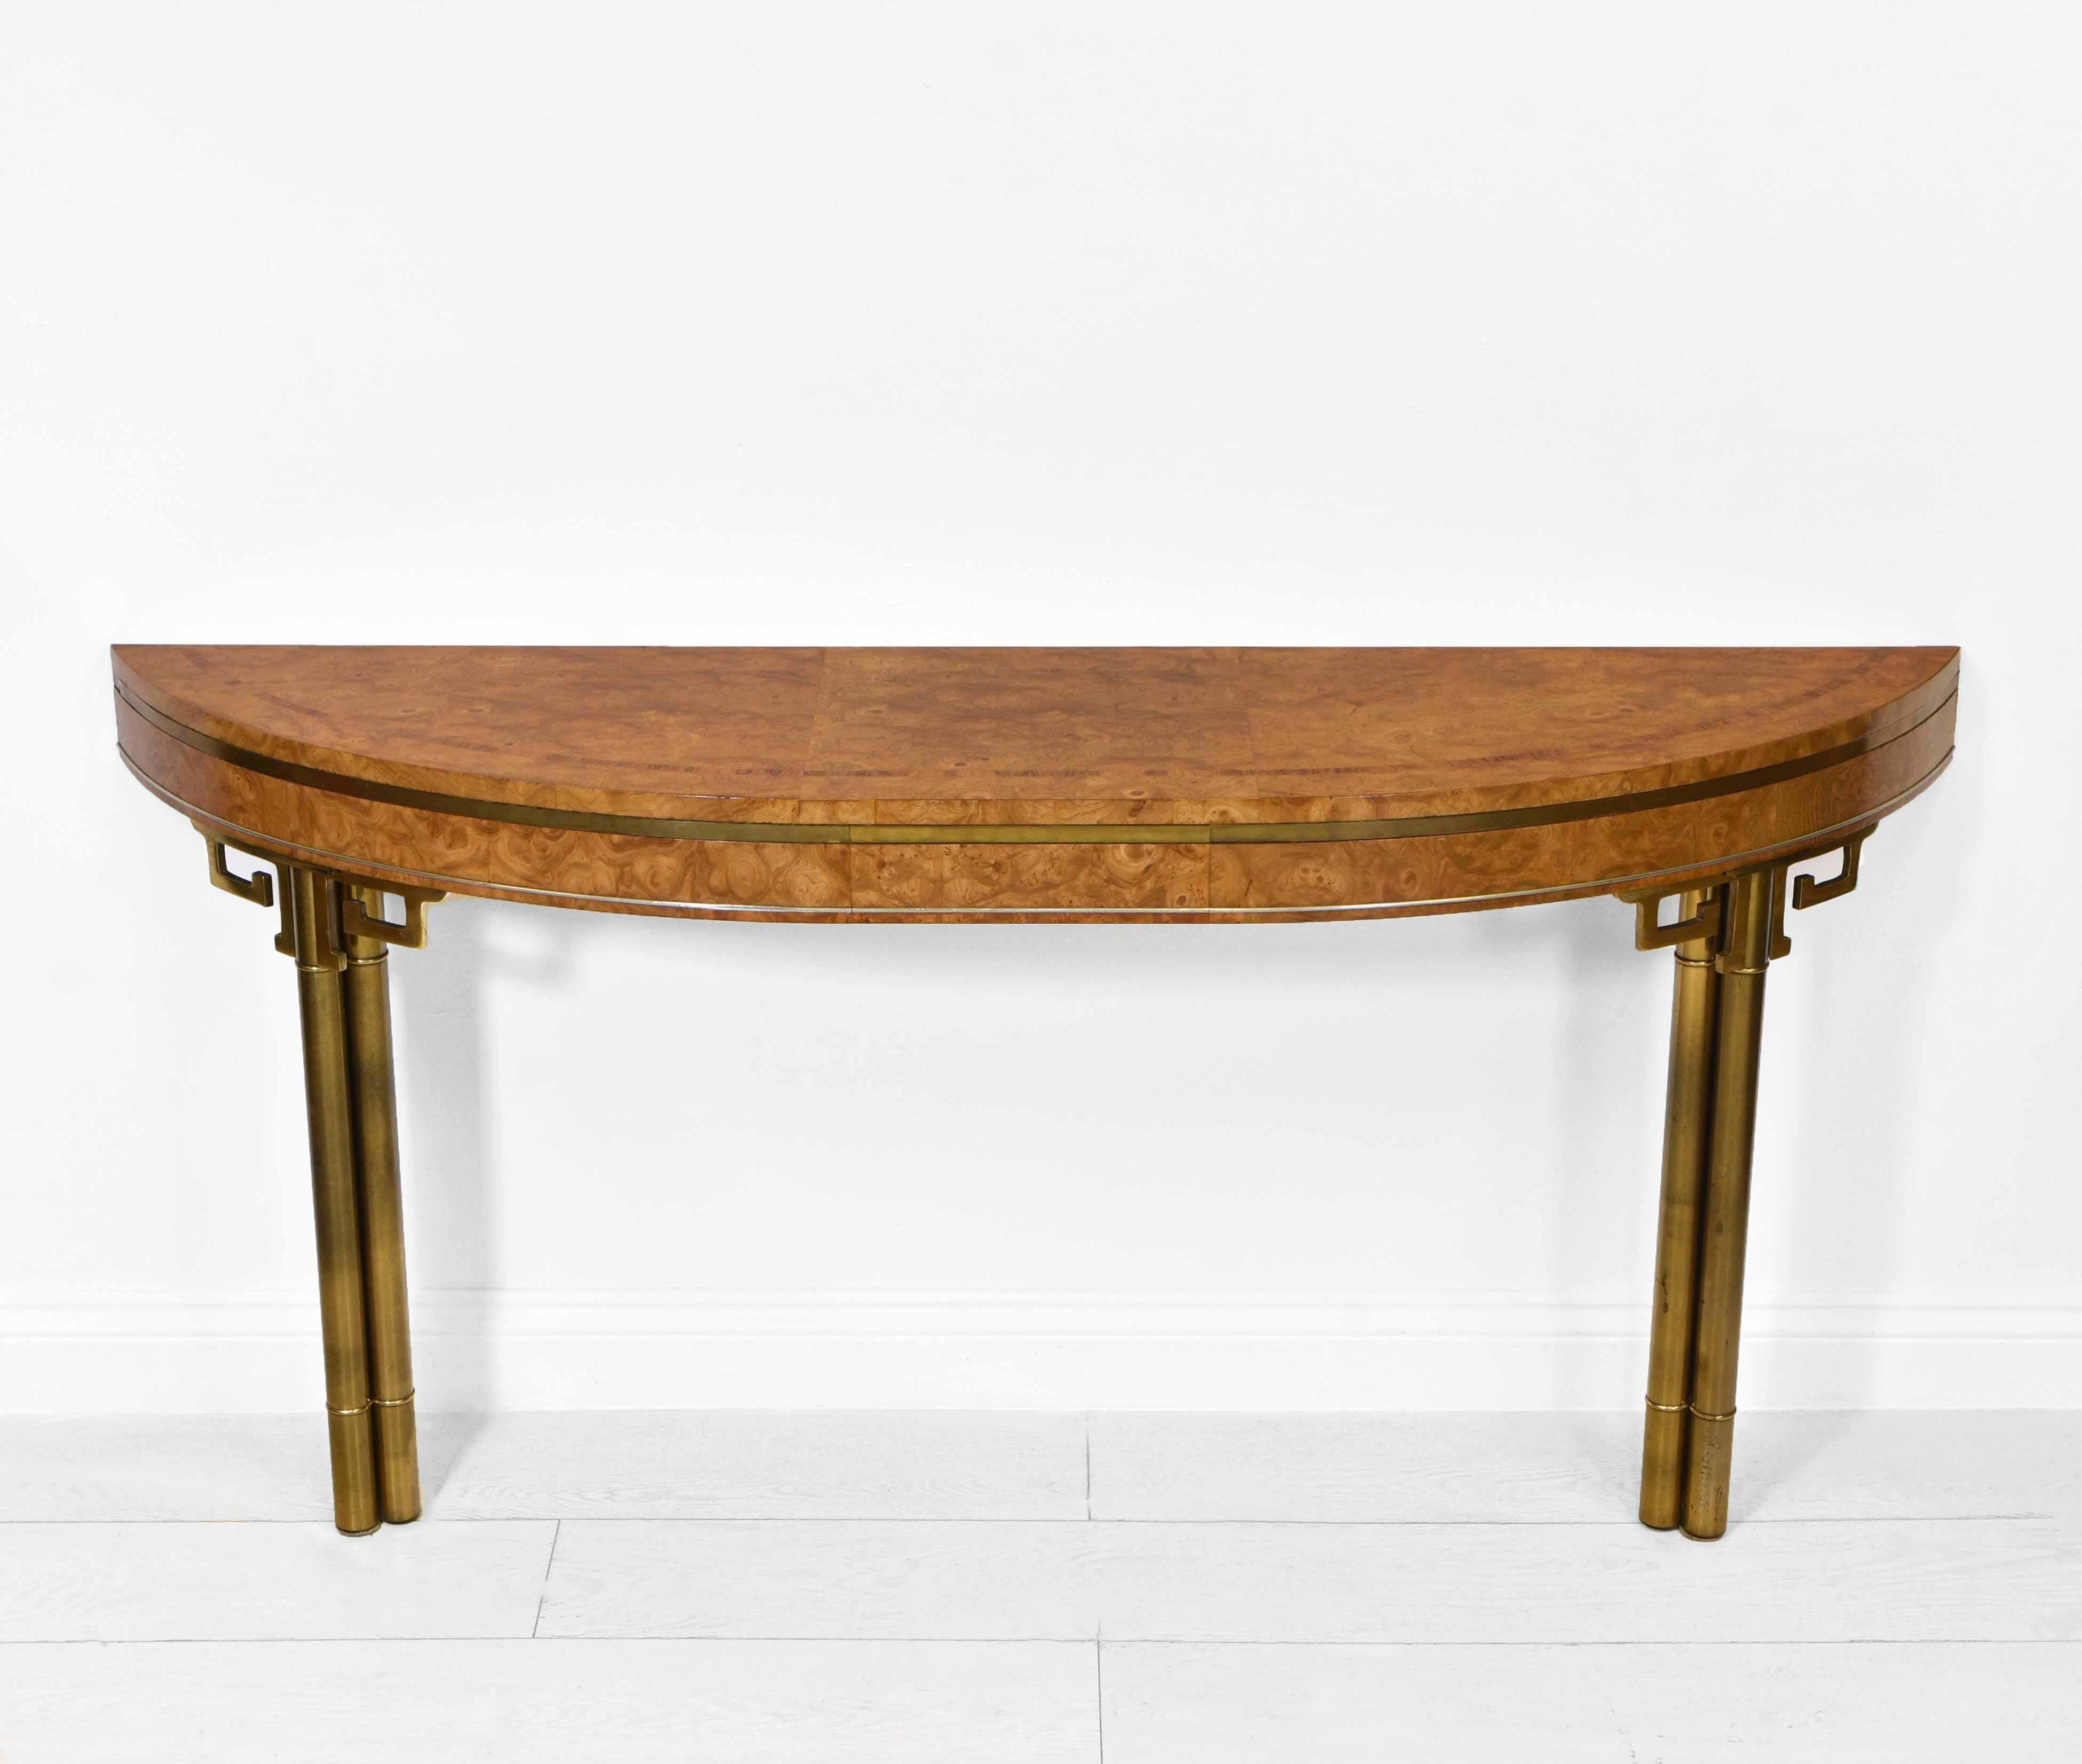 A wonderful vintage burr wood console table with brass Greek key detail. Circa 1970s. Almost certainly made by the American firm, Mastercraft, Grand Rapids, Michigan.

Superbly figured burr wood veneer to the top and frieze, which is a pale, golden